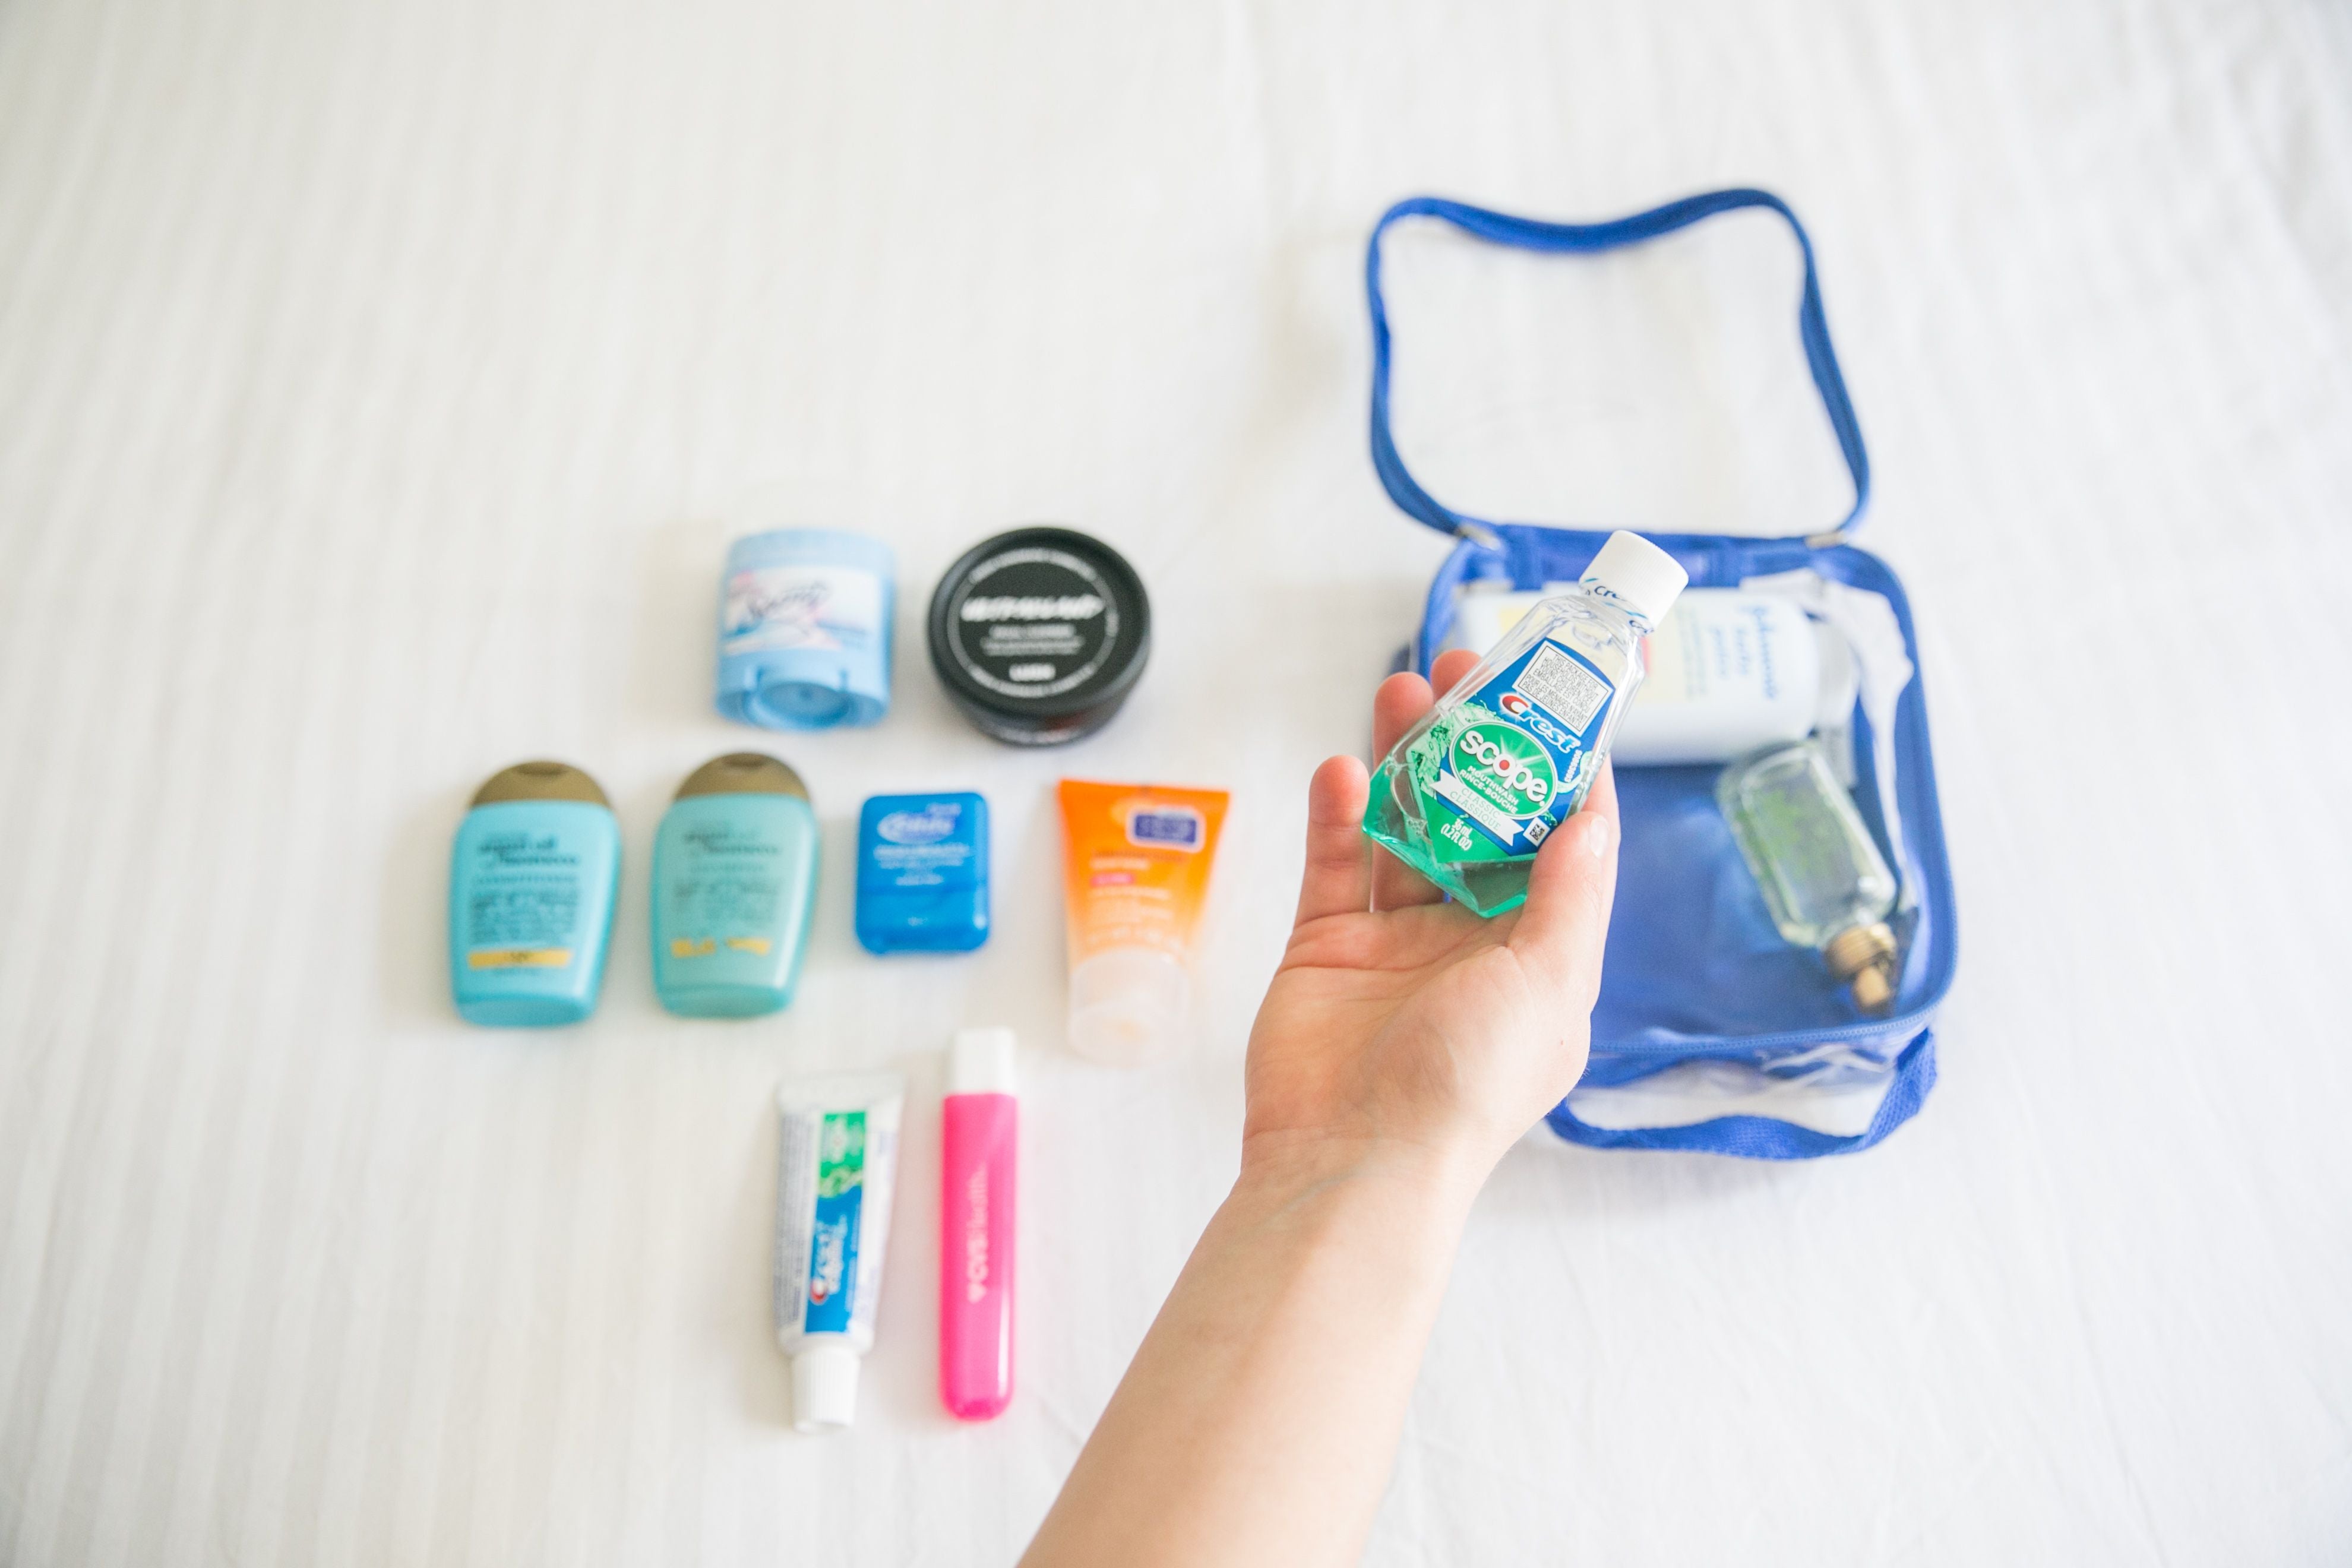 Travel size mouthwash and other toiletries